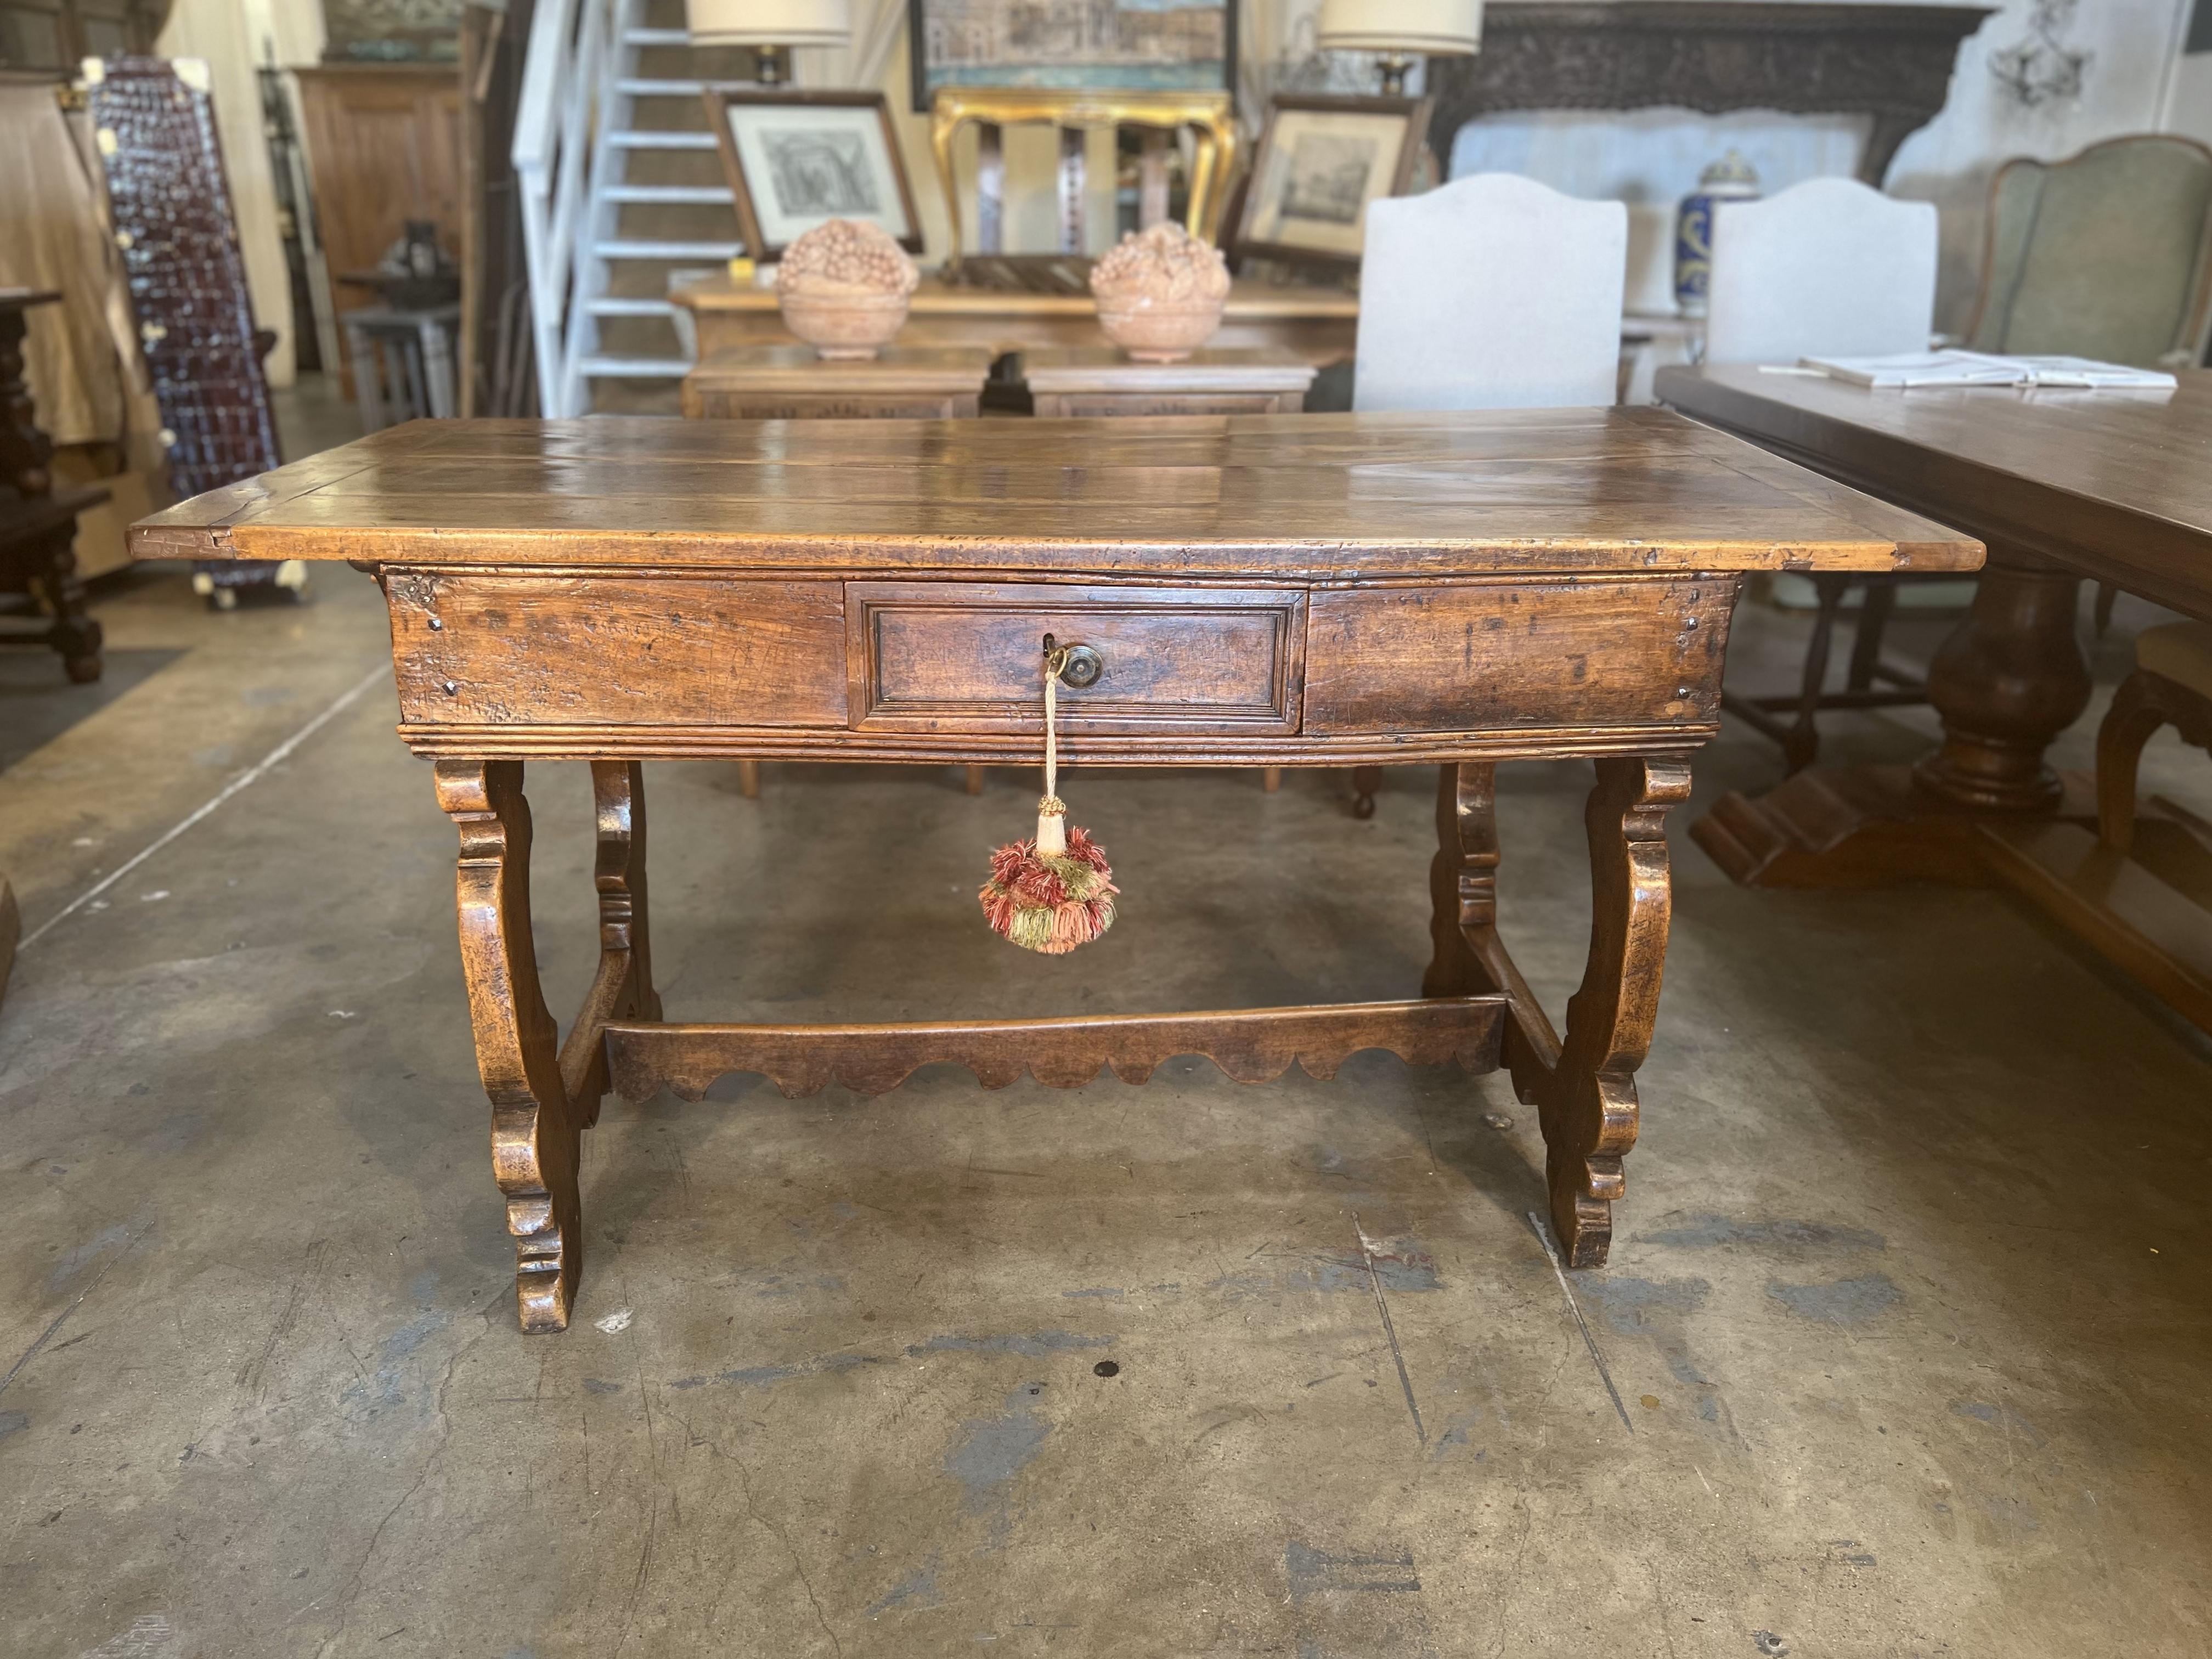 This is an original Italian Antique desk built in Central Italy, Emilia or Tuscany in the Mid-17th Century made of solid walnut with wood nails joining the planks.

Measures: 61.5